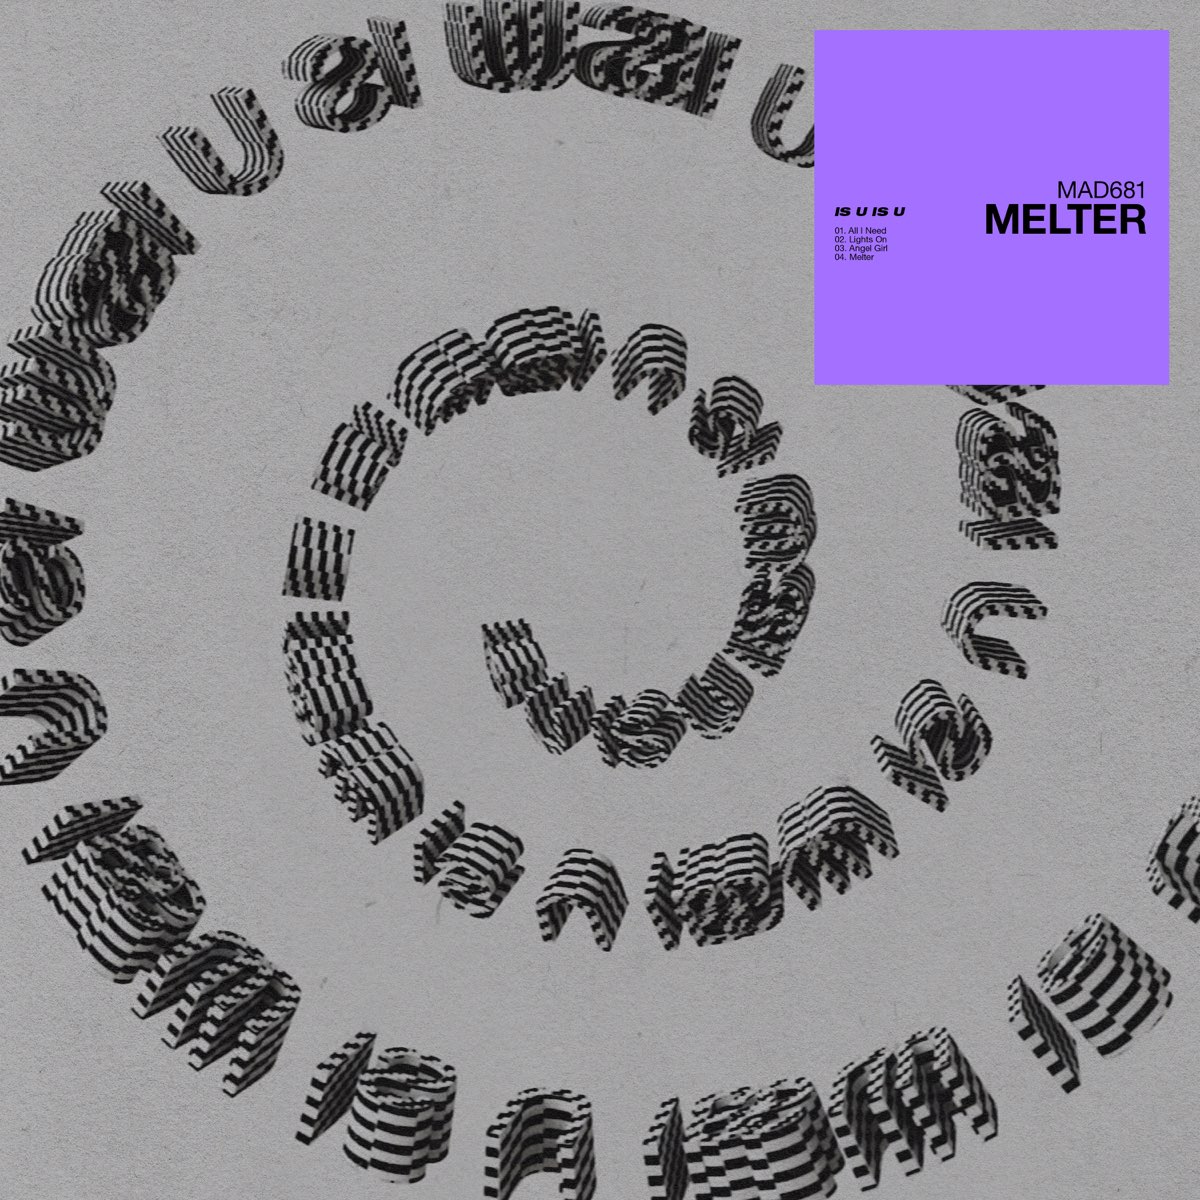 Kito, Chrome Sparks, & IS U IS U — Melter cover artwork